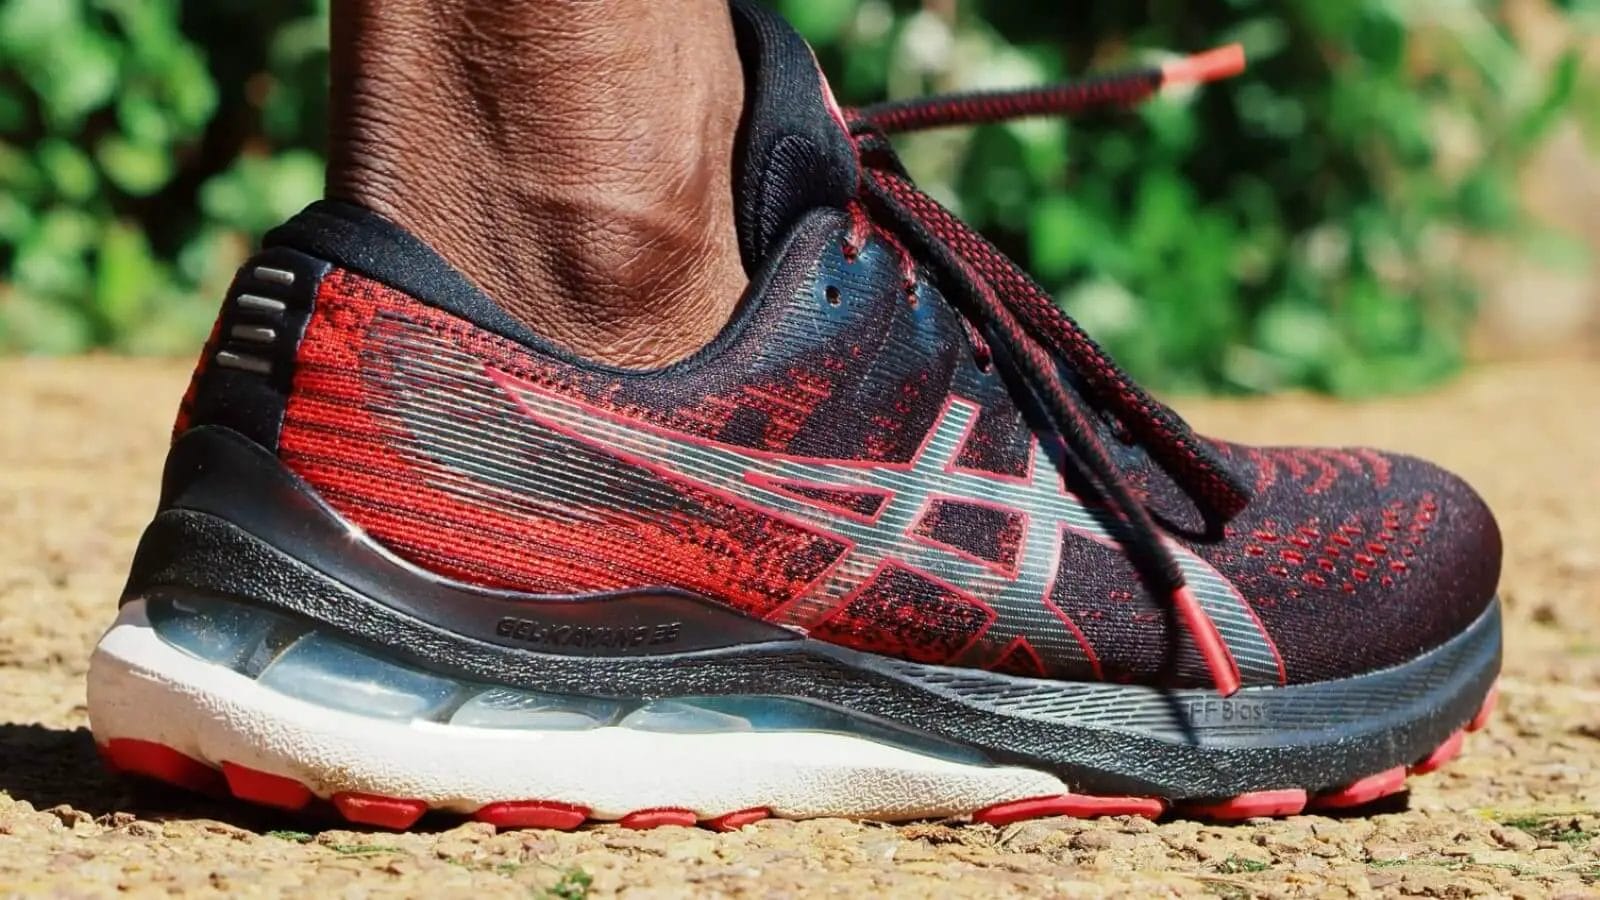 Details of the rear of the asics gel kayano 28 shoe while someone is running on pavement.